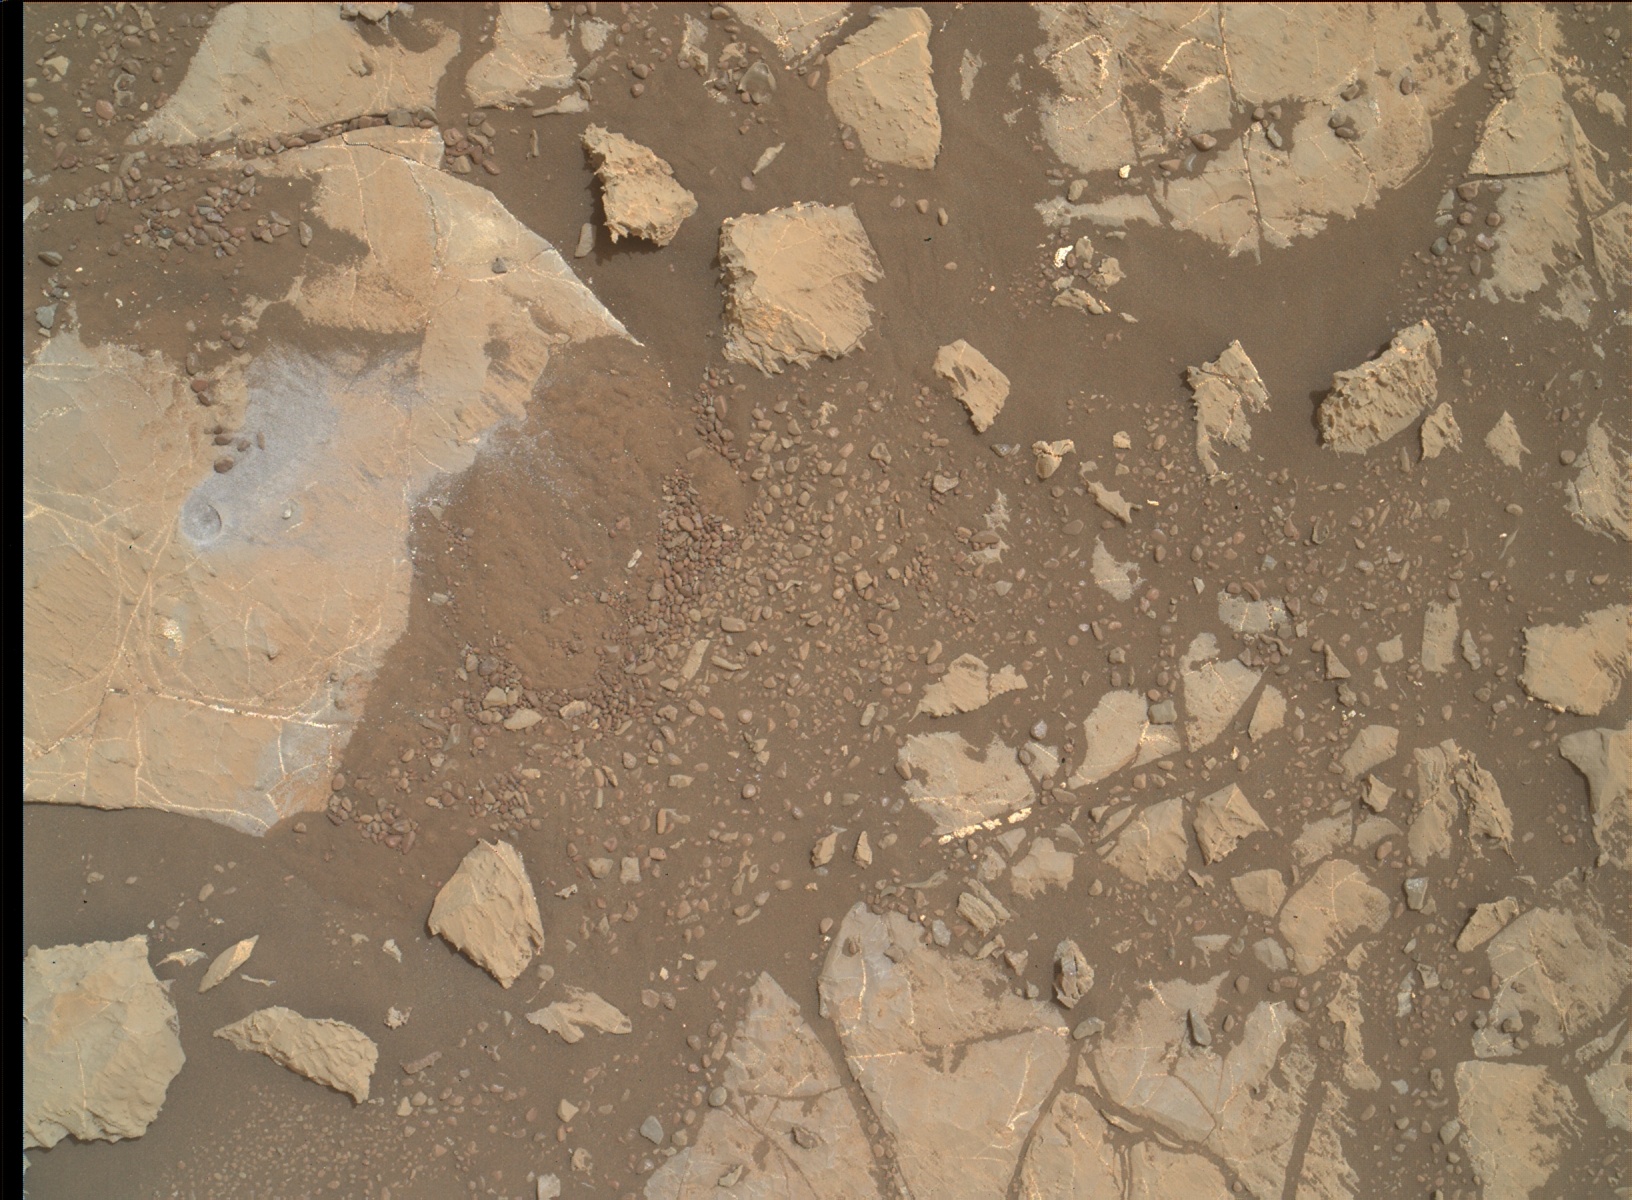 Nasa's Mars rover Curiosity acquired this image using its Mars Hand Lens Imager (MAHLI) on Sol 2172